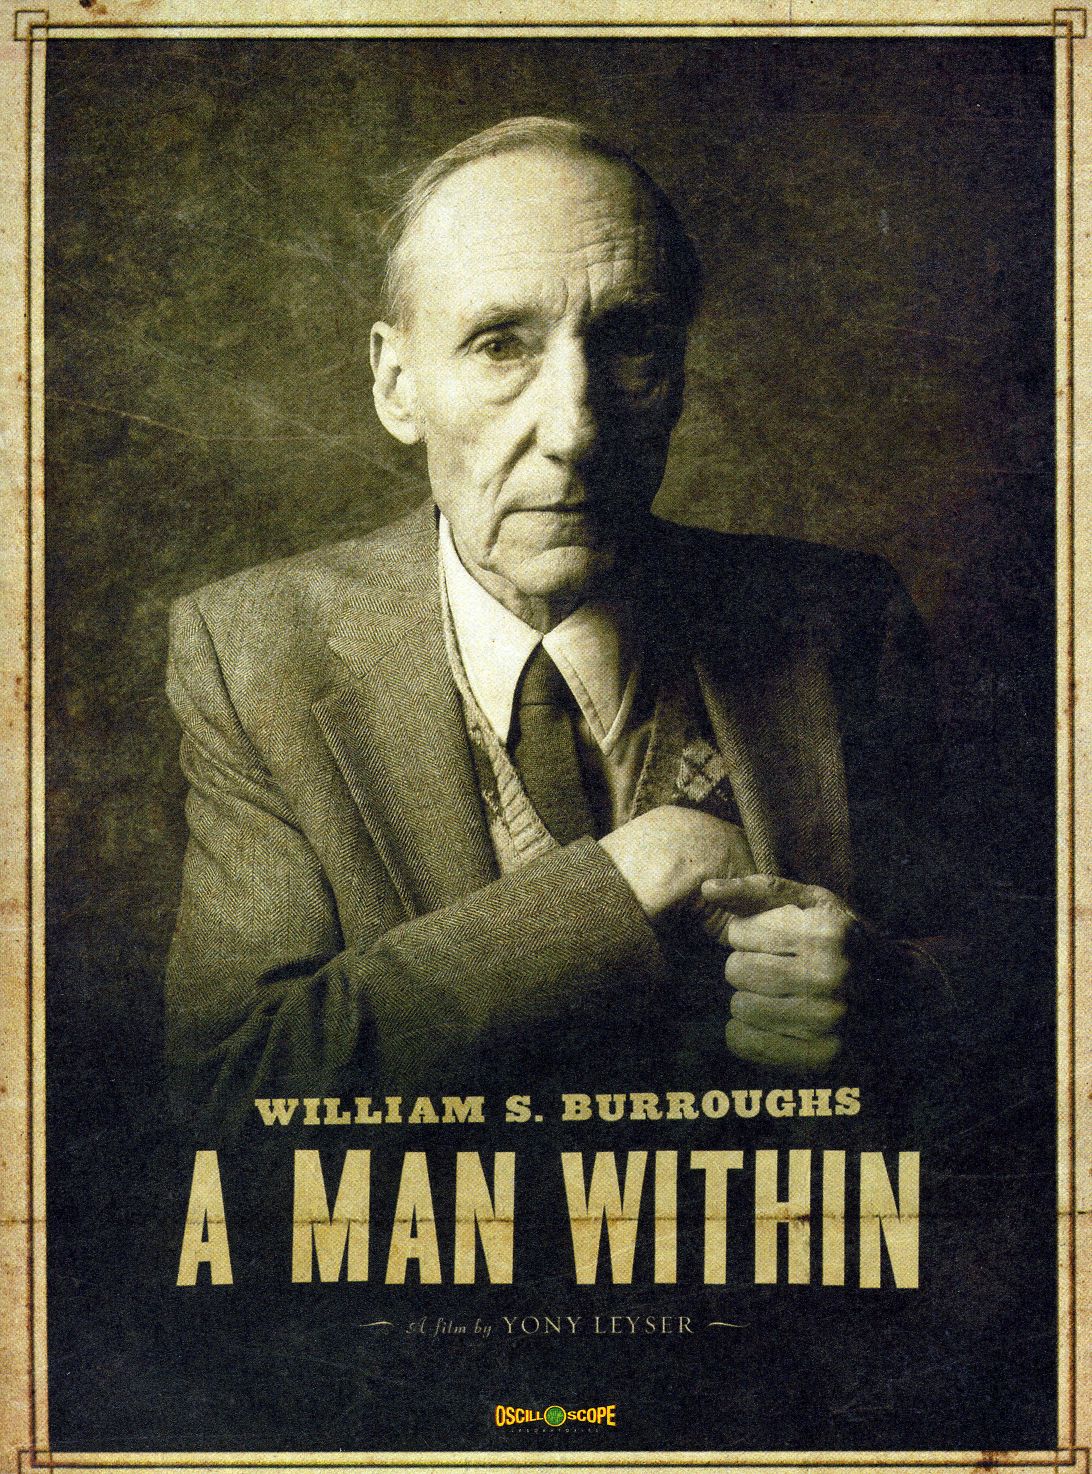 WILLIAM S BURROUGHS: A MAN WITHIN